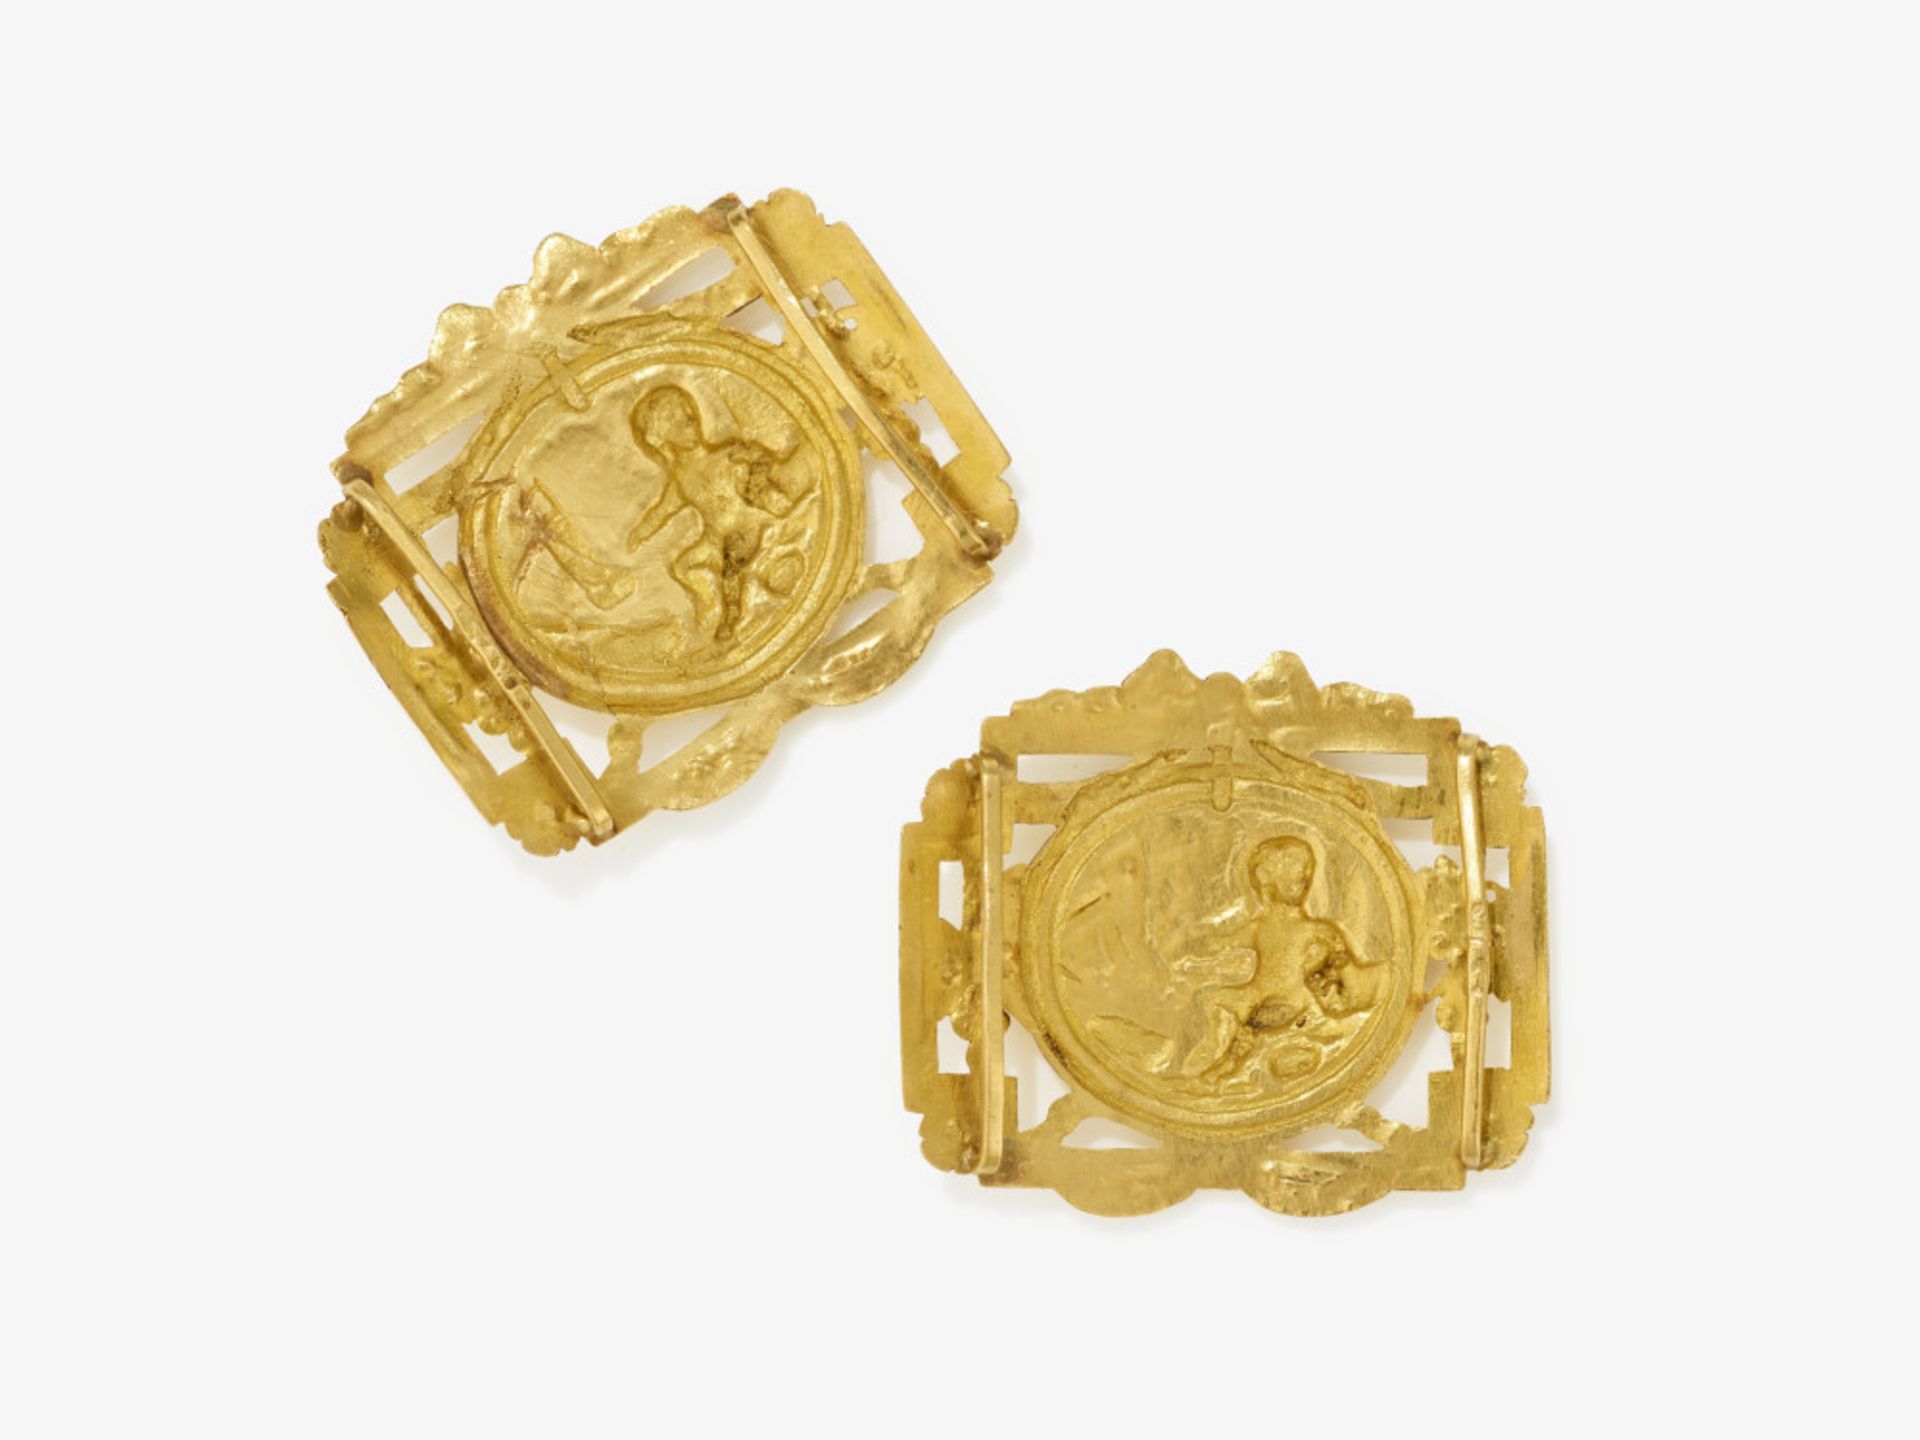 A pair of shoe buckles - Probably France, circa 1780 - Image 2 of 2